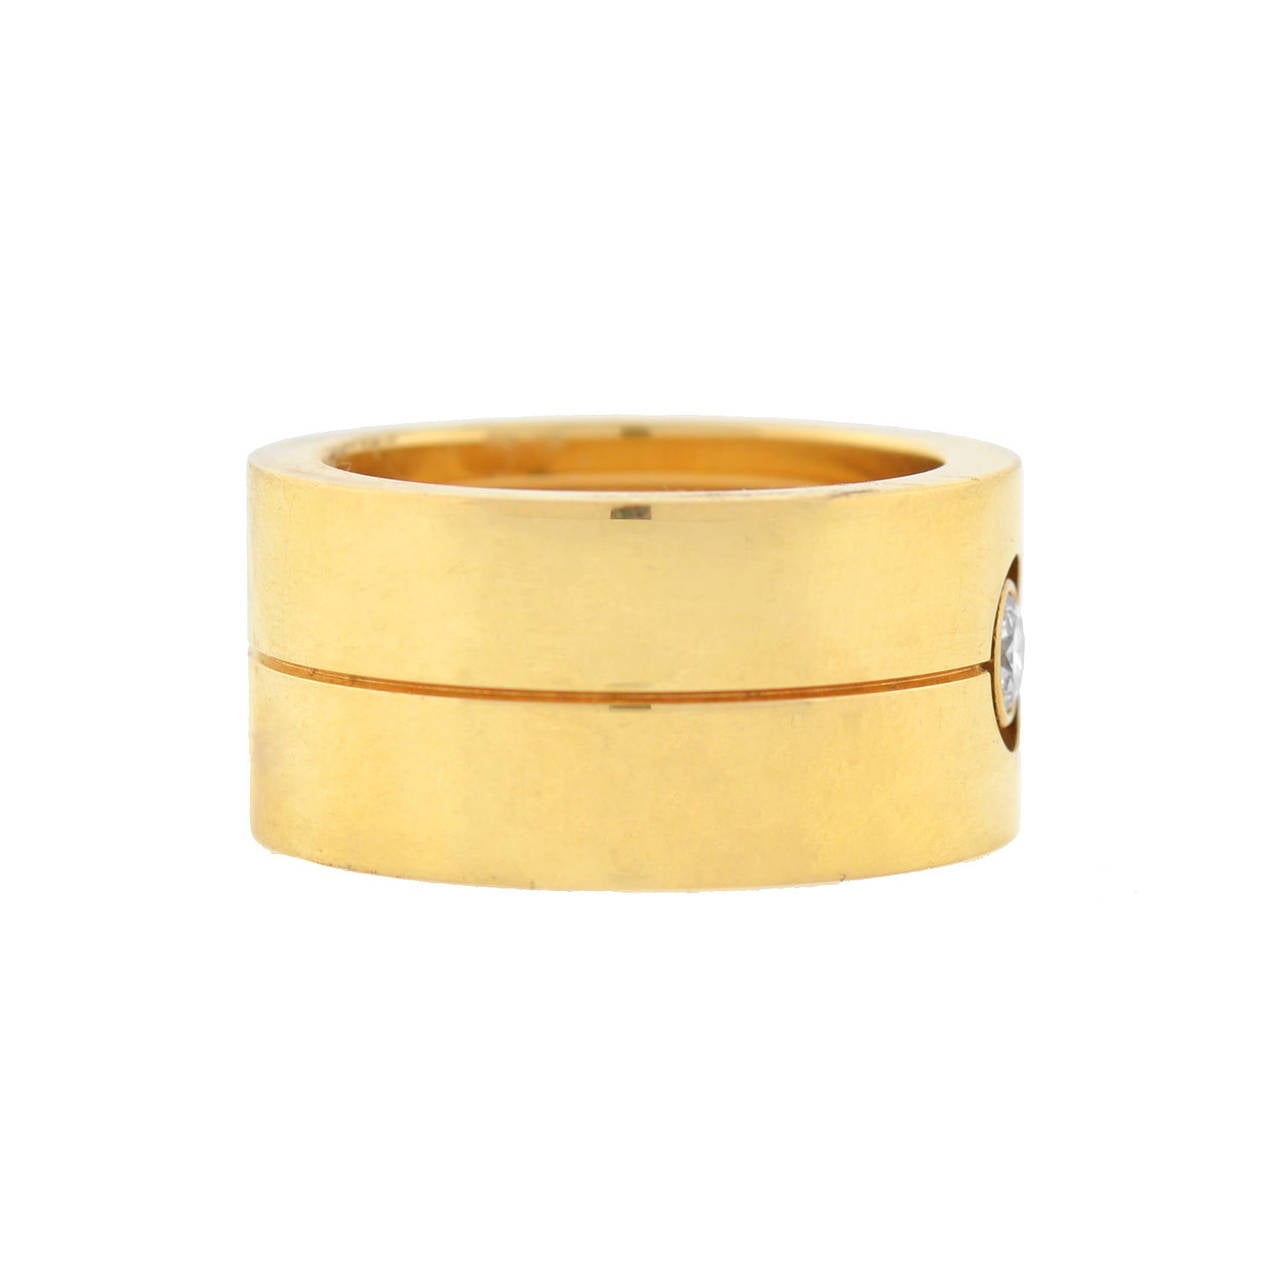 This fabulous ring is a signed piece by Cartier! Made of vibrant 18kt yellow gold, the heavy, wide ring has a striking design and is substantial in size. A sparkling bezel set diamond rests in the center, set within a circular airline. An engraved